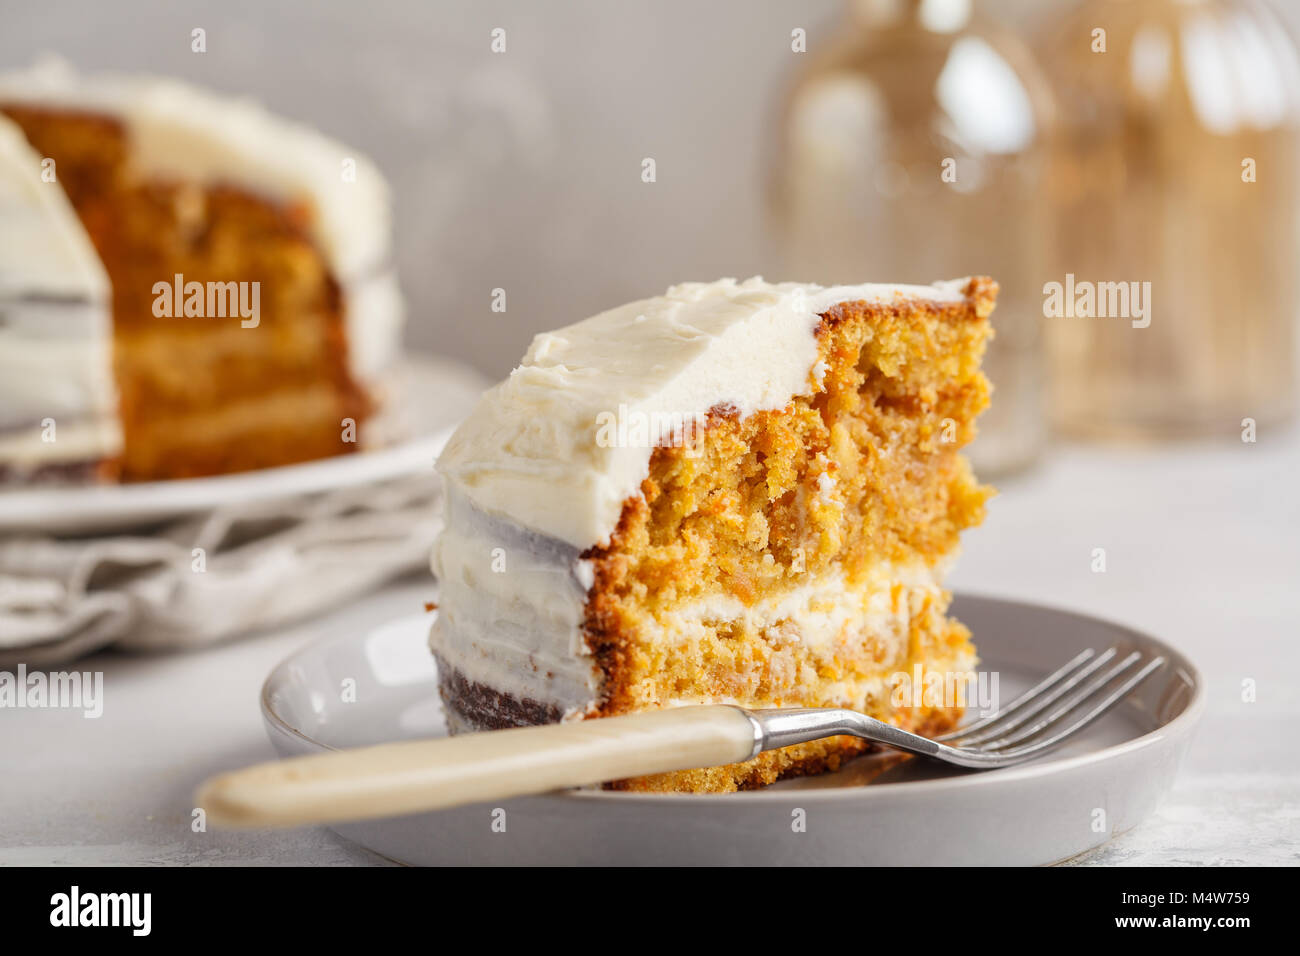 Carrot homemade cake with white cream on a gray background. Festive dessert concept. Stock Photo